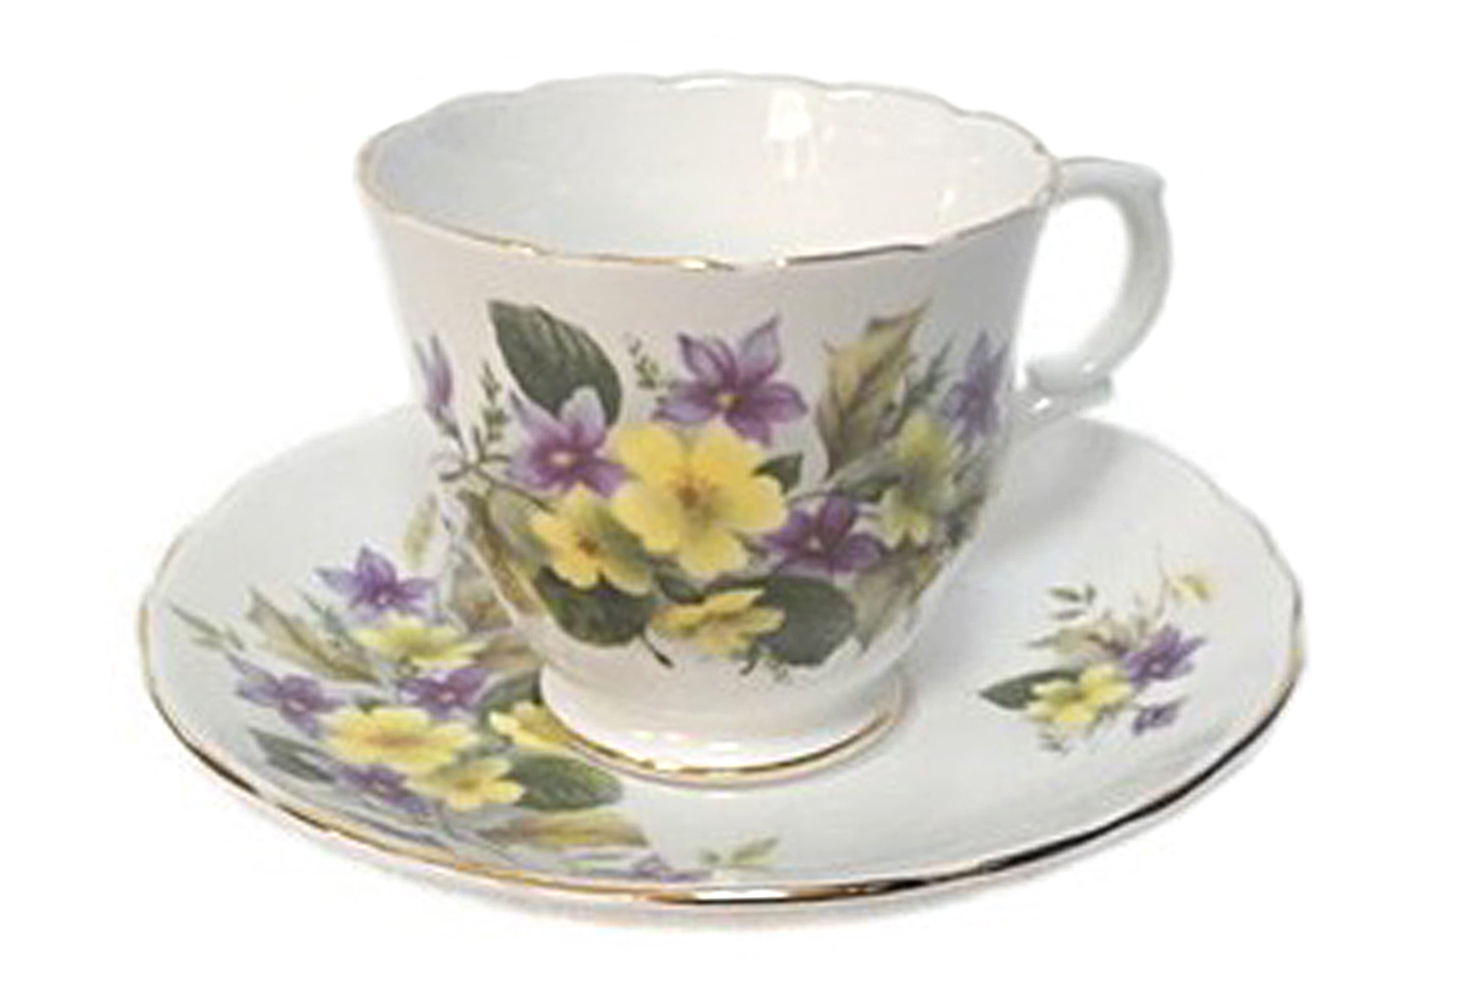 Staffordshire Tea Cup And Saucer Purple Violets   Second Shout Out